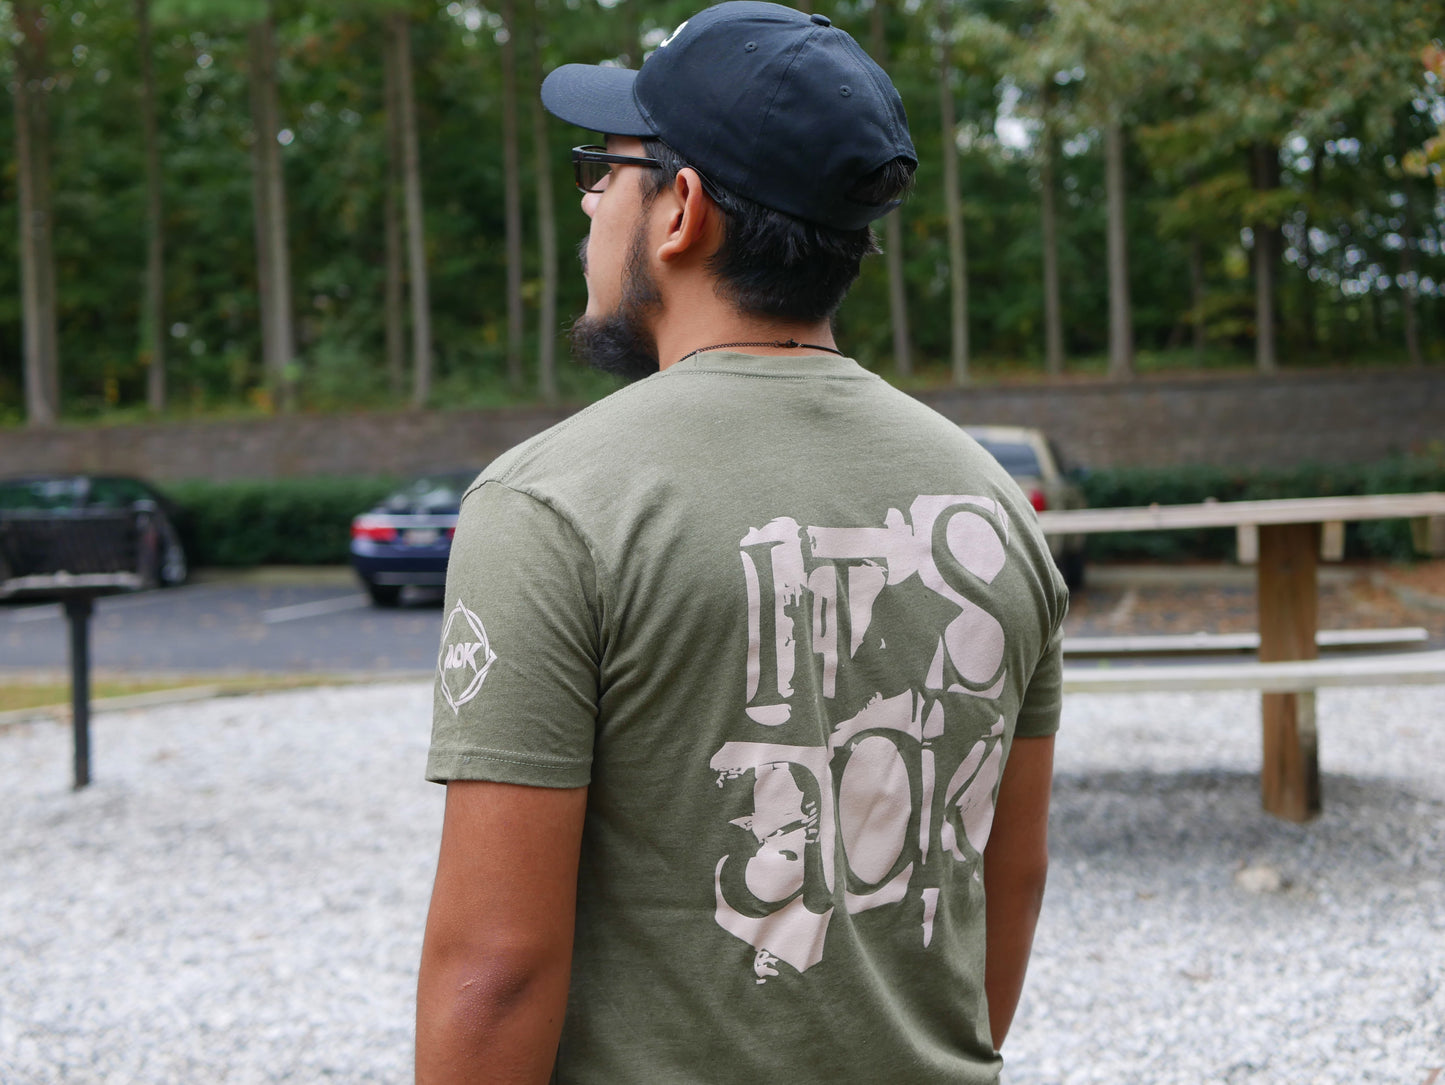 Speak Your Truth Military Green T-Shirt